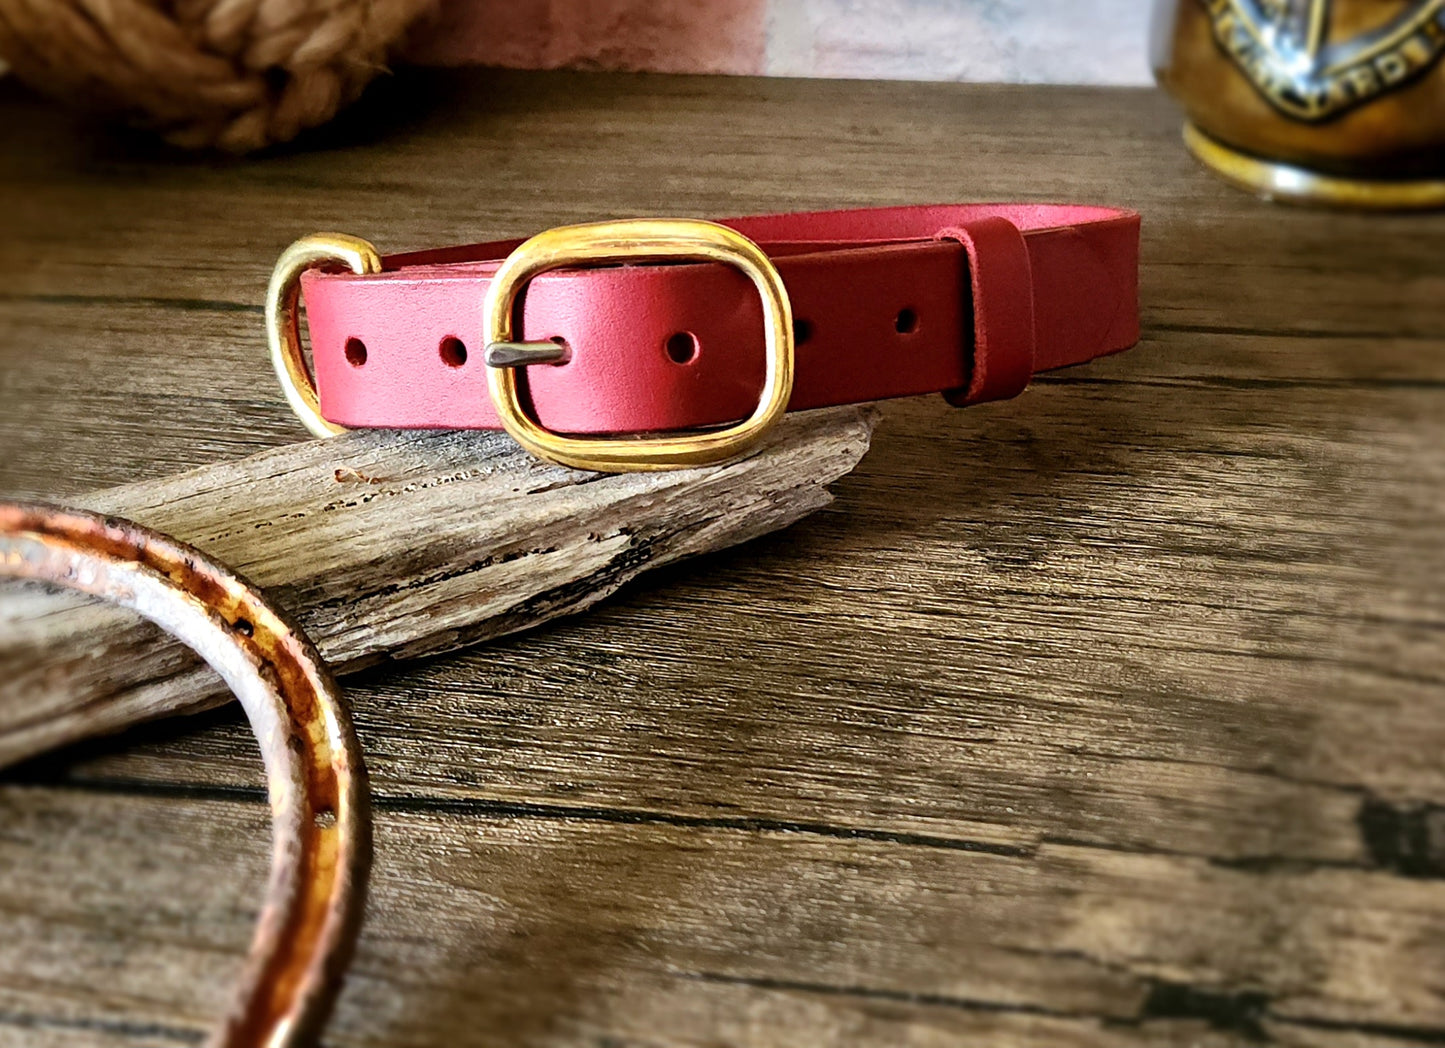 The working or larger, leather dog collar in brass & stainless swage buckles